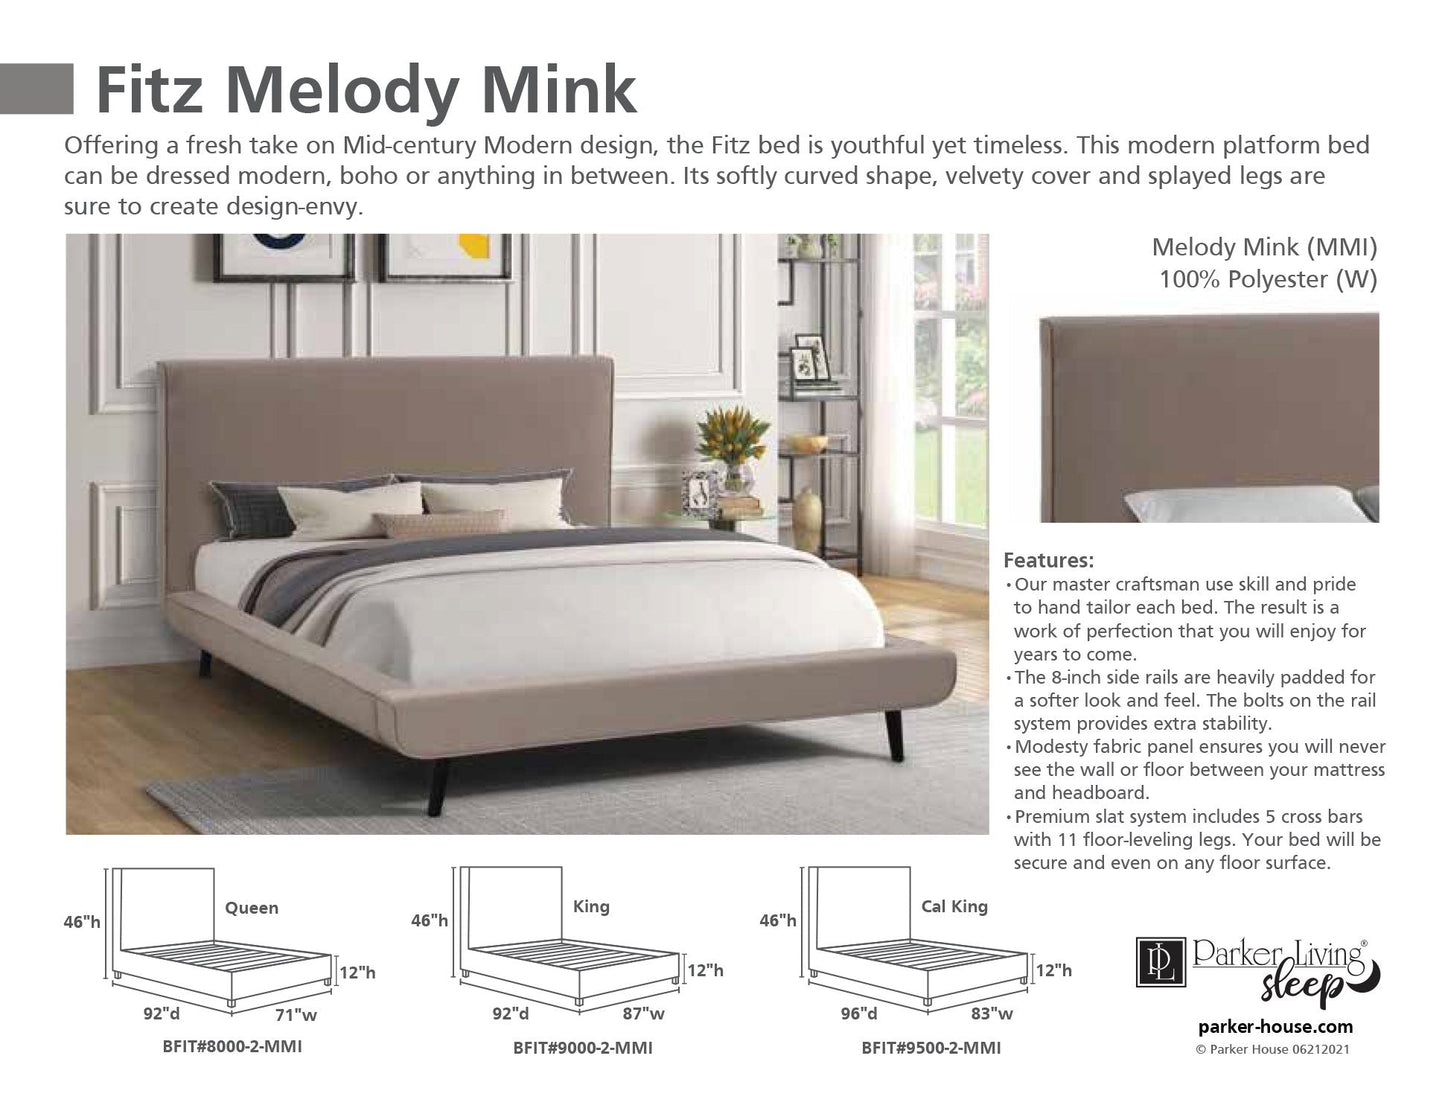 FITZ - MELODY MINK CALIFORNIA KING BED 6/0